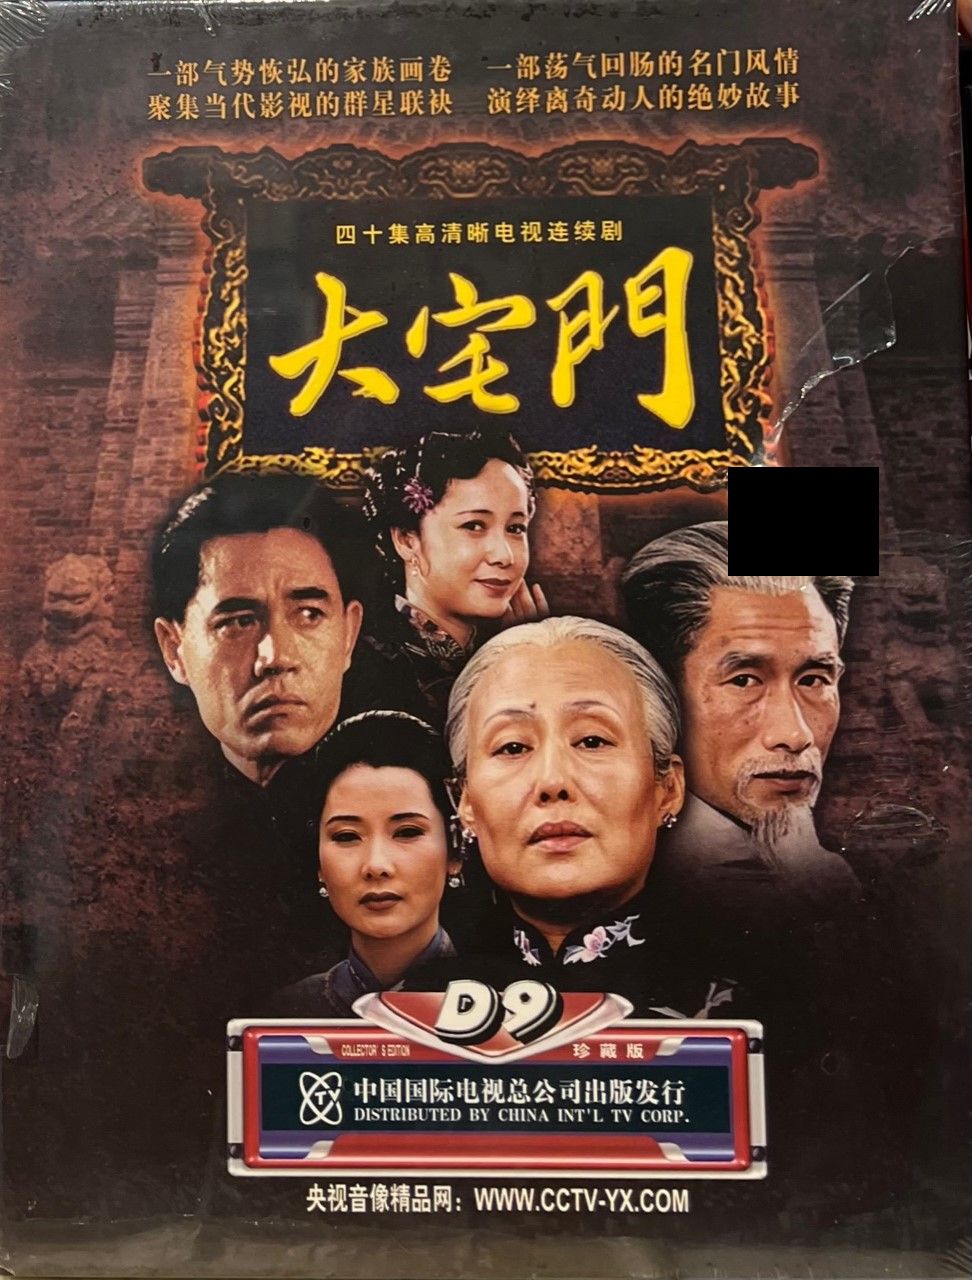 THE FAMILY 大宅門 2000 DVD (1-40 END) NON ENGLISH SUBSTITLE (REGION FREE)